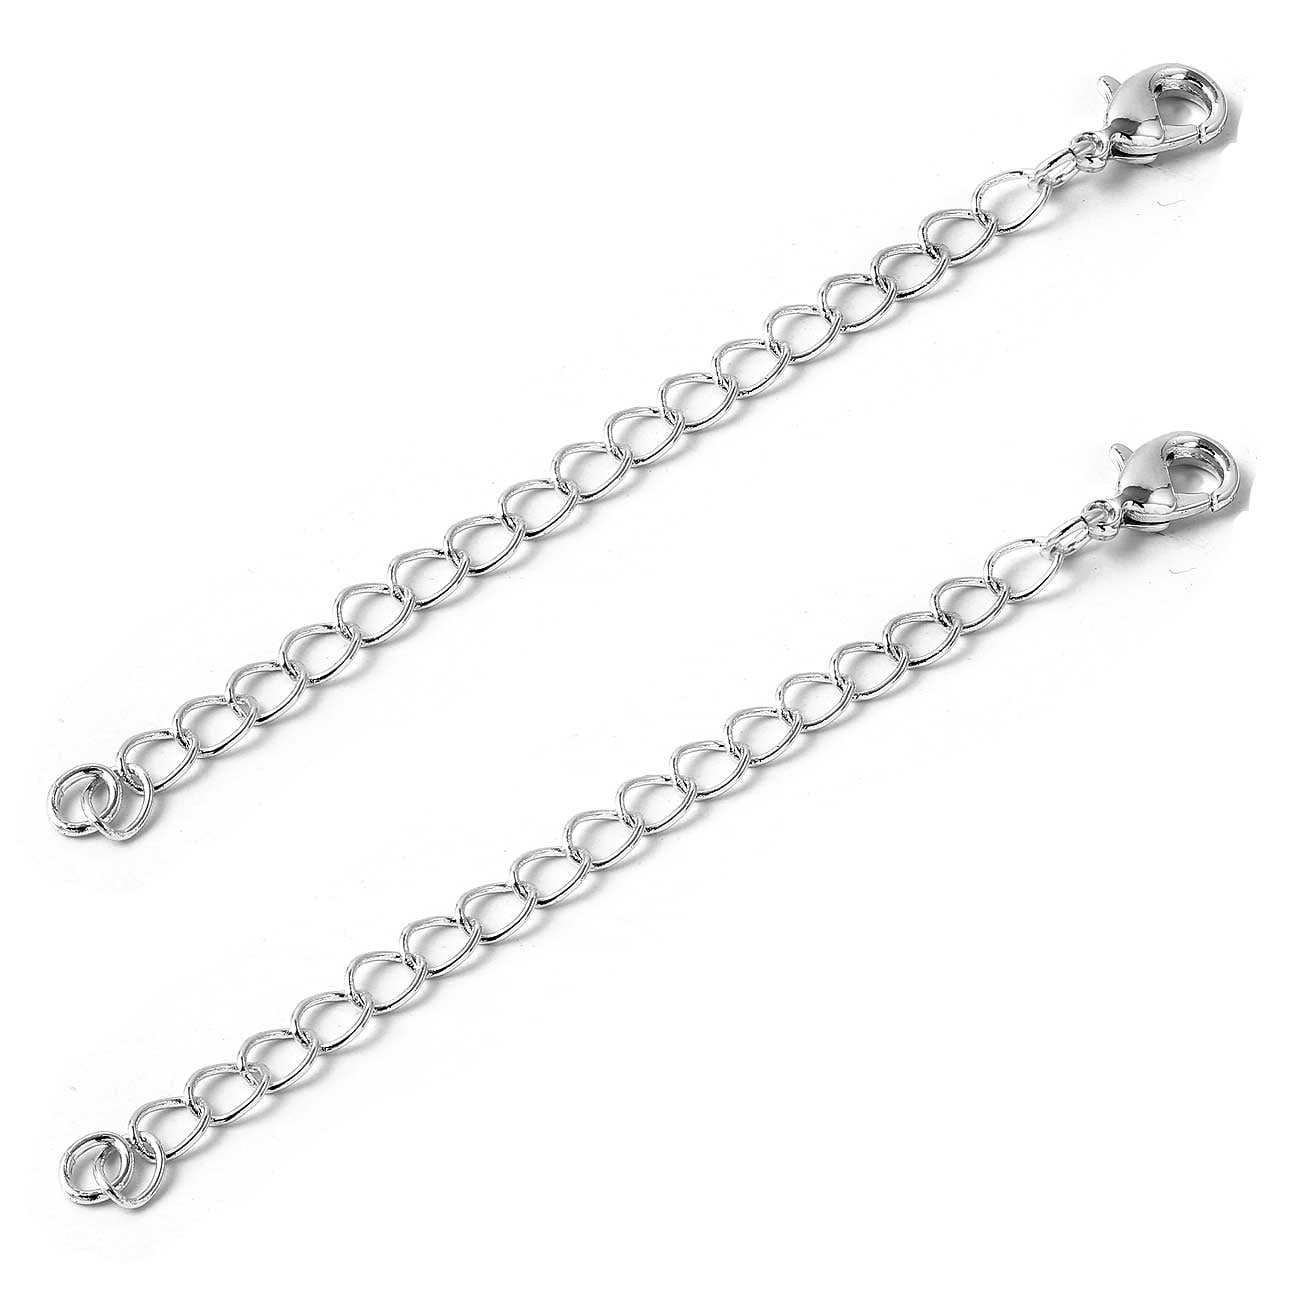 Sterling Silver necklace safety chain 1 inch long.. bracelet extender